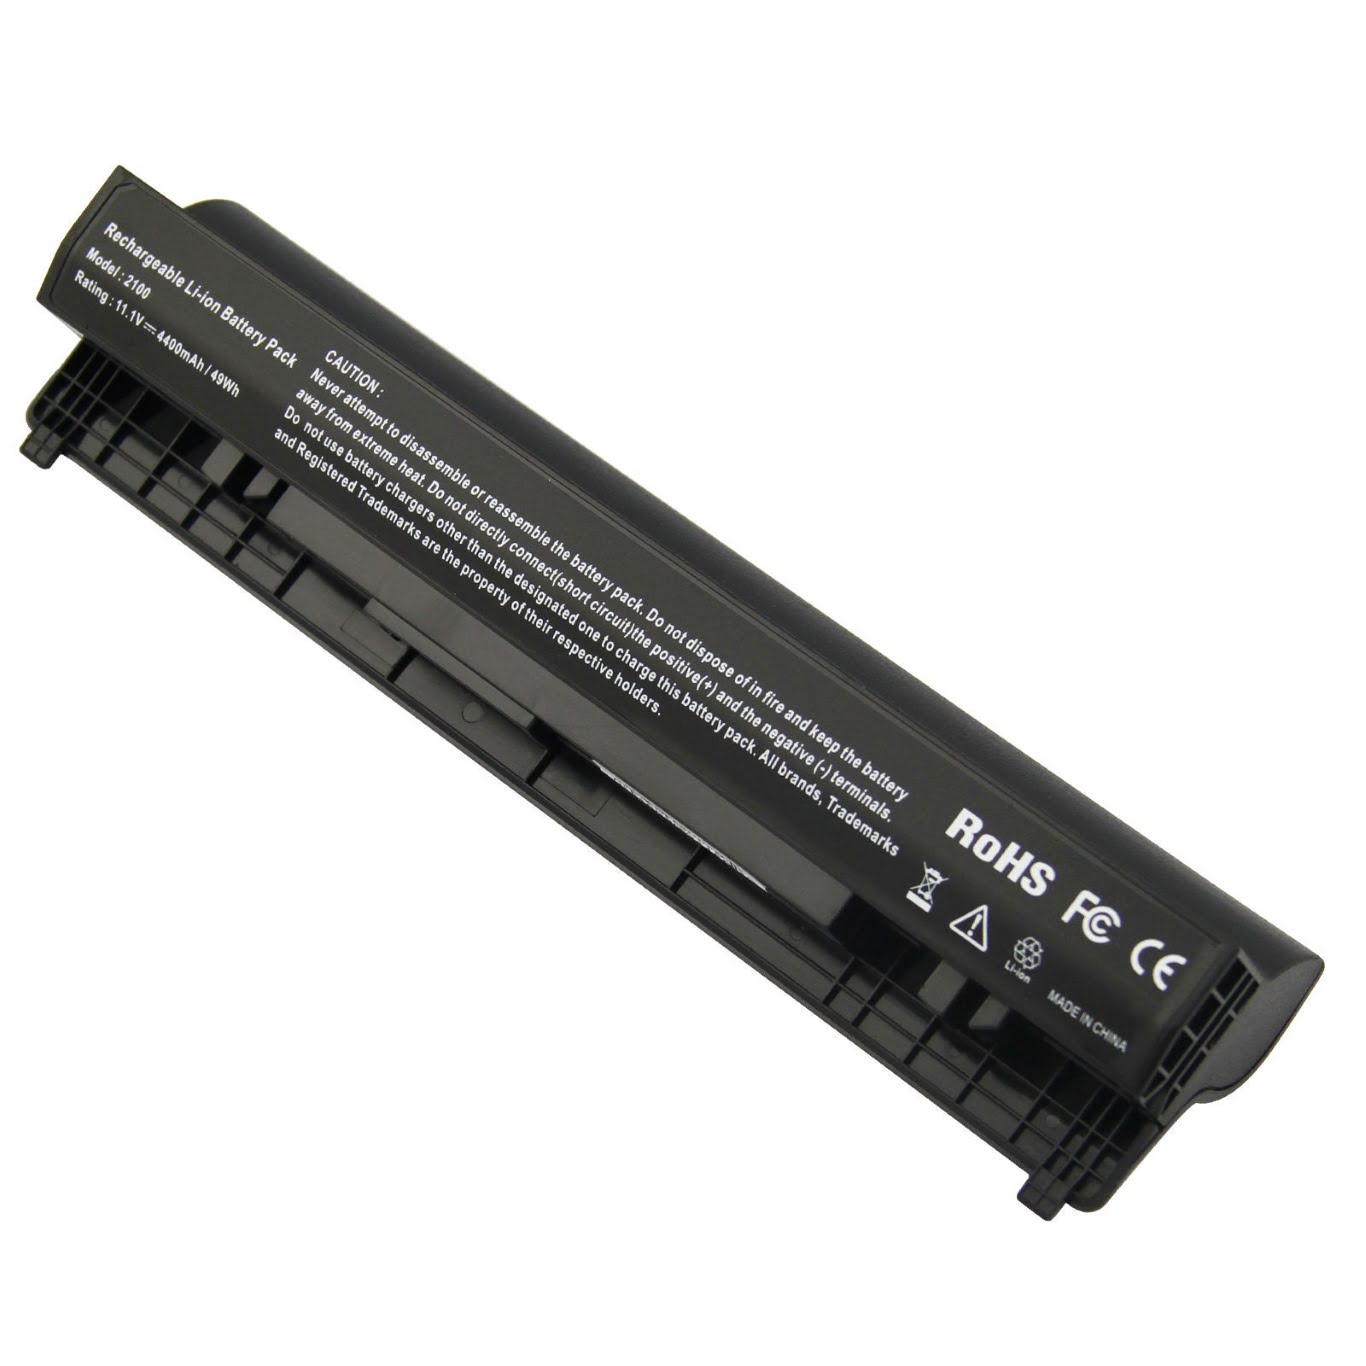 00R271, 312-0229 replacement Laptop Battery for Dell Latitude 2100, Latitude 2110, 11.1 V, 6 cells, 5200 Mah